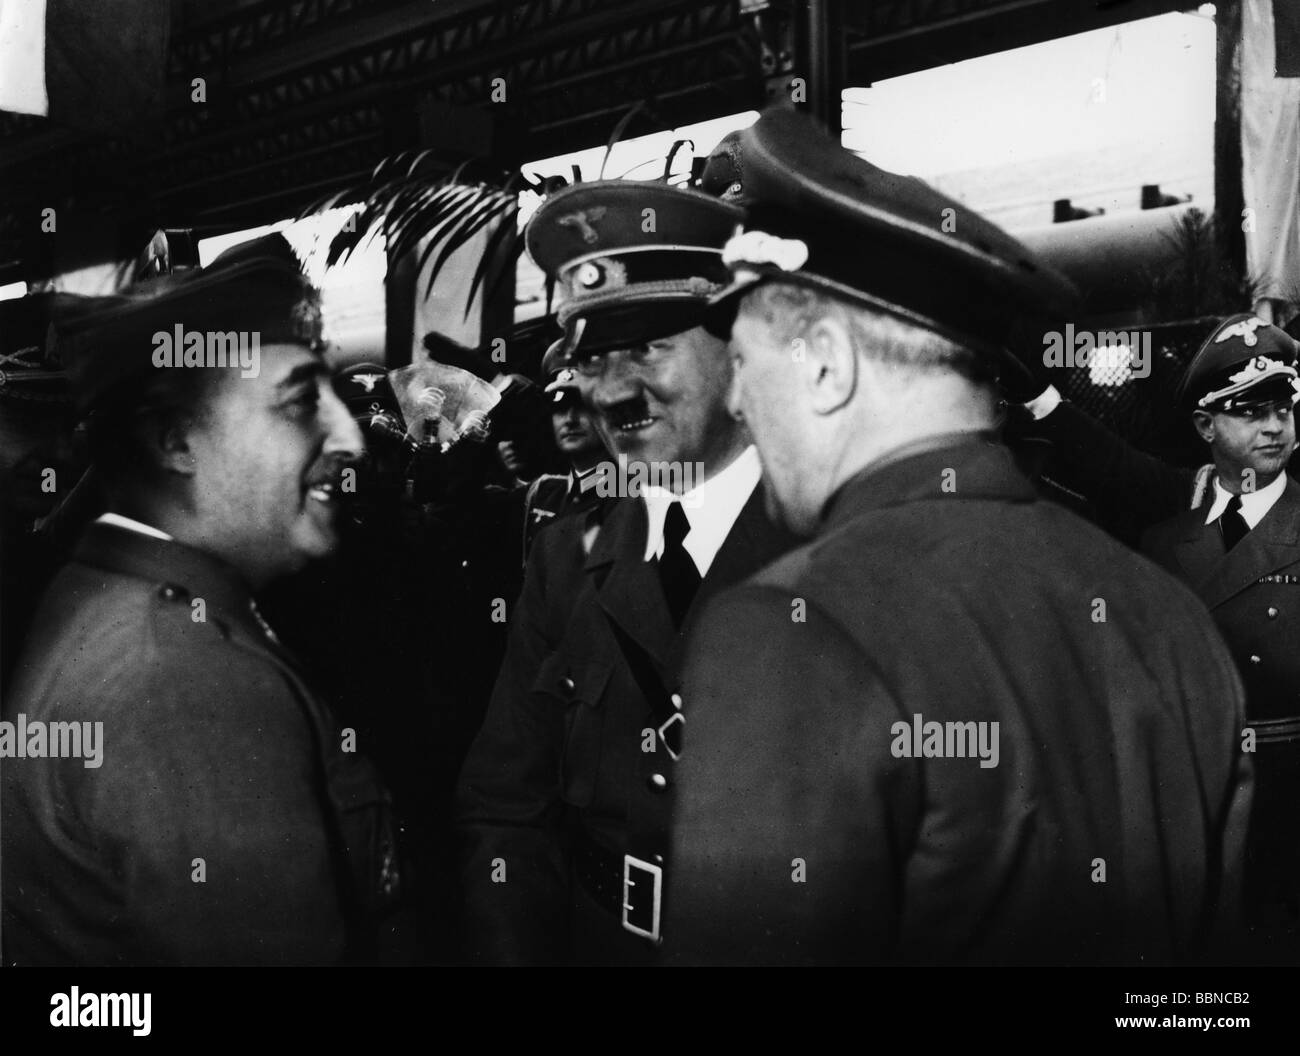 events, Second World War / WWII, Spain, meeting between Adolf Hitler and Francisco Franco at Hendaye, 23.10.1940, Stock Photo